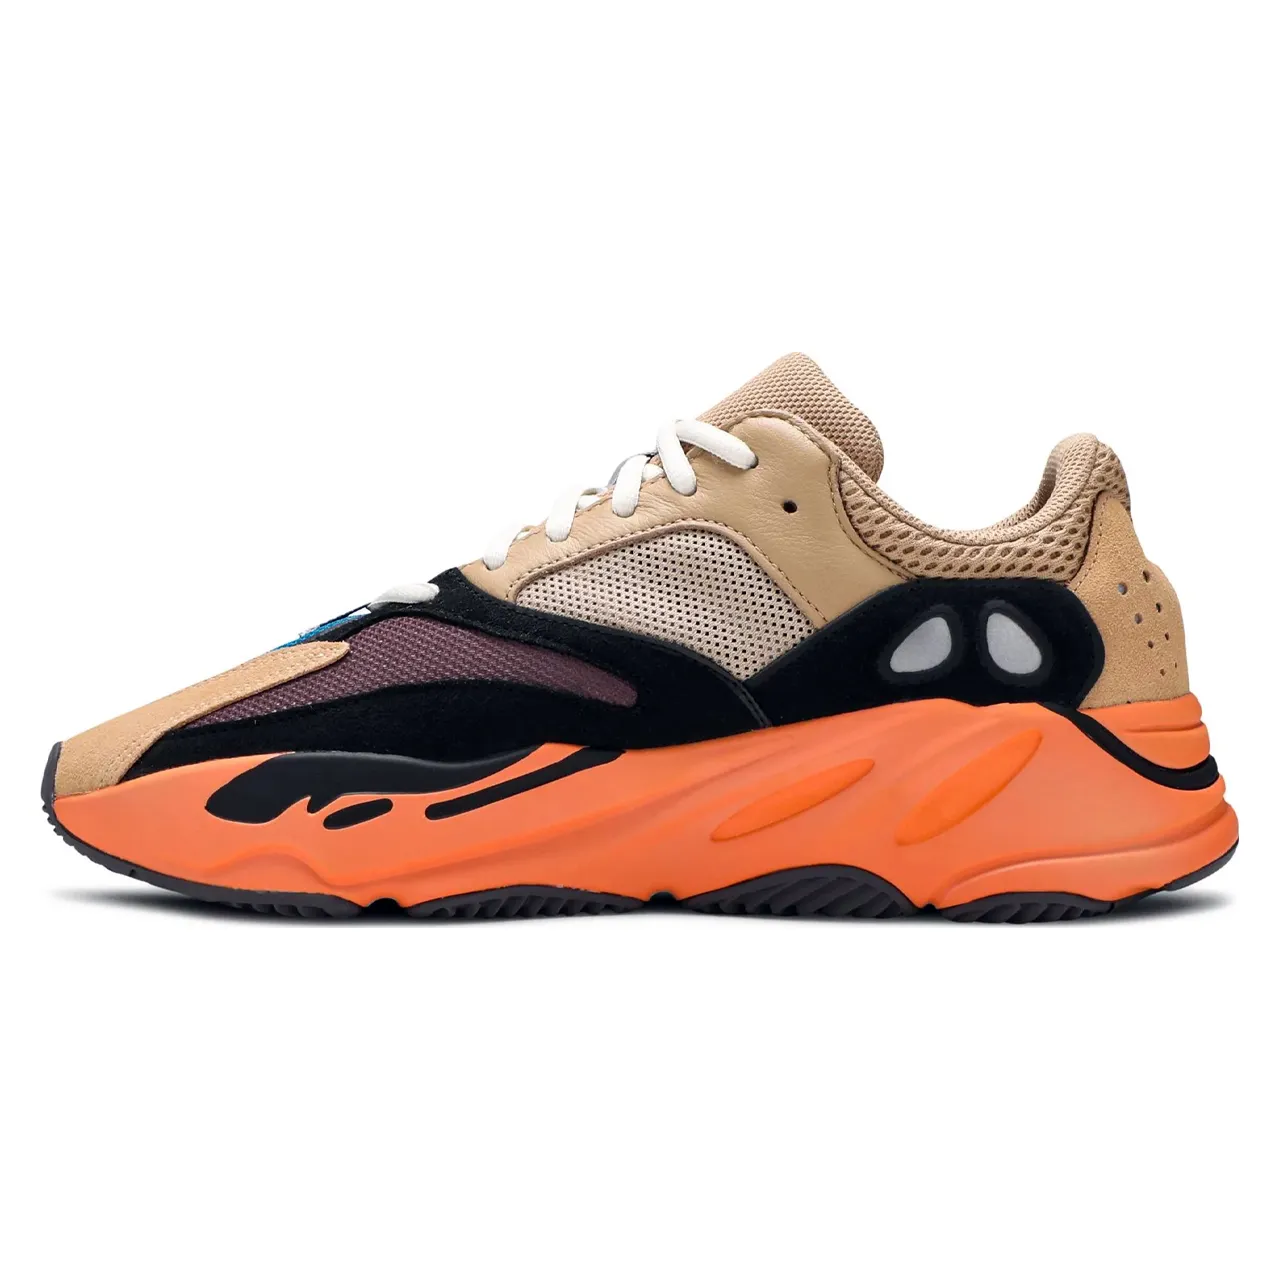 Yeezy Boost 700 'Enflame Amber'